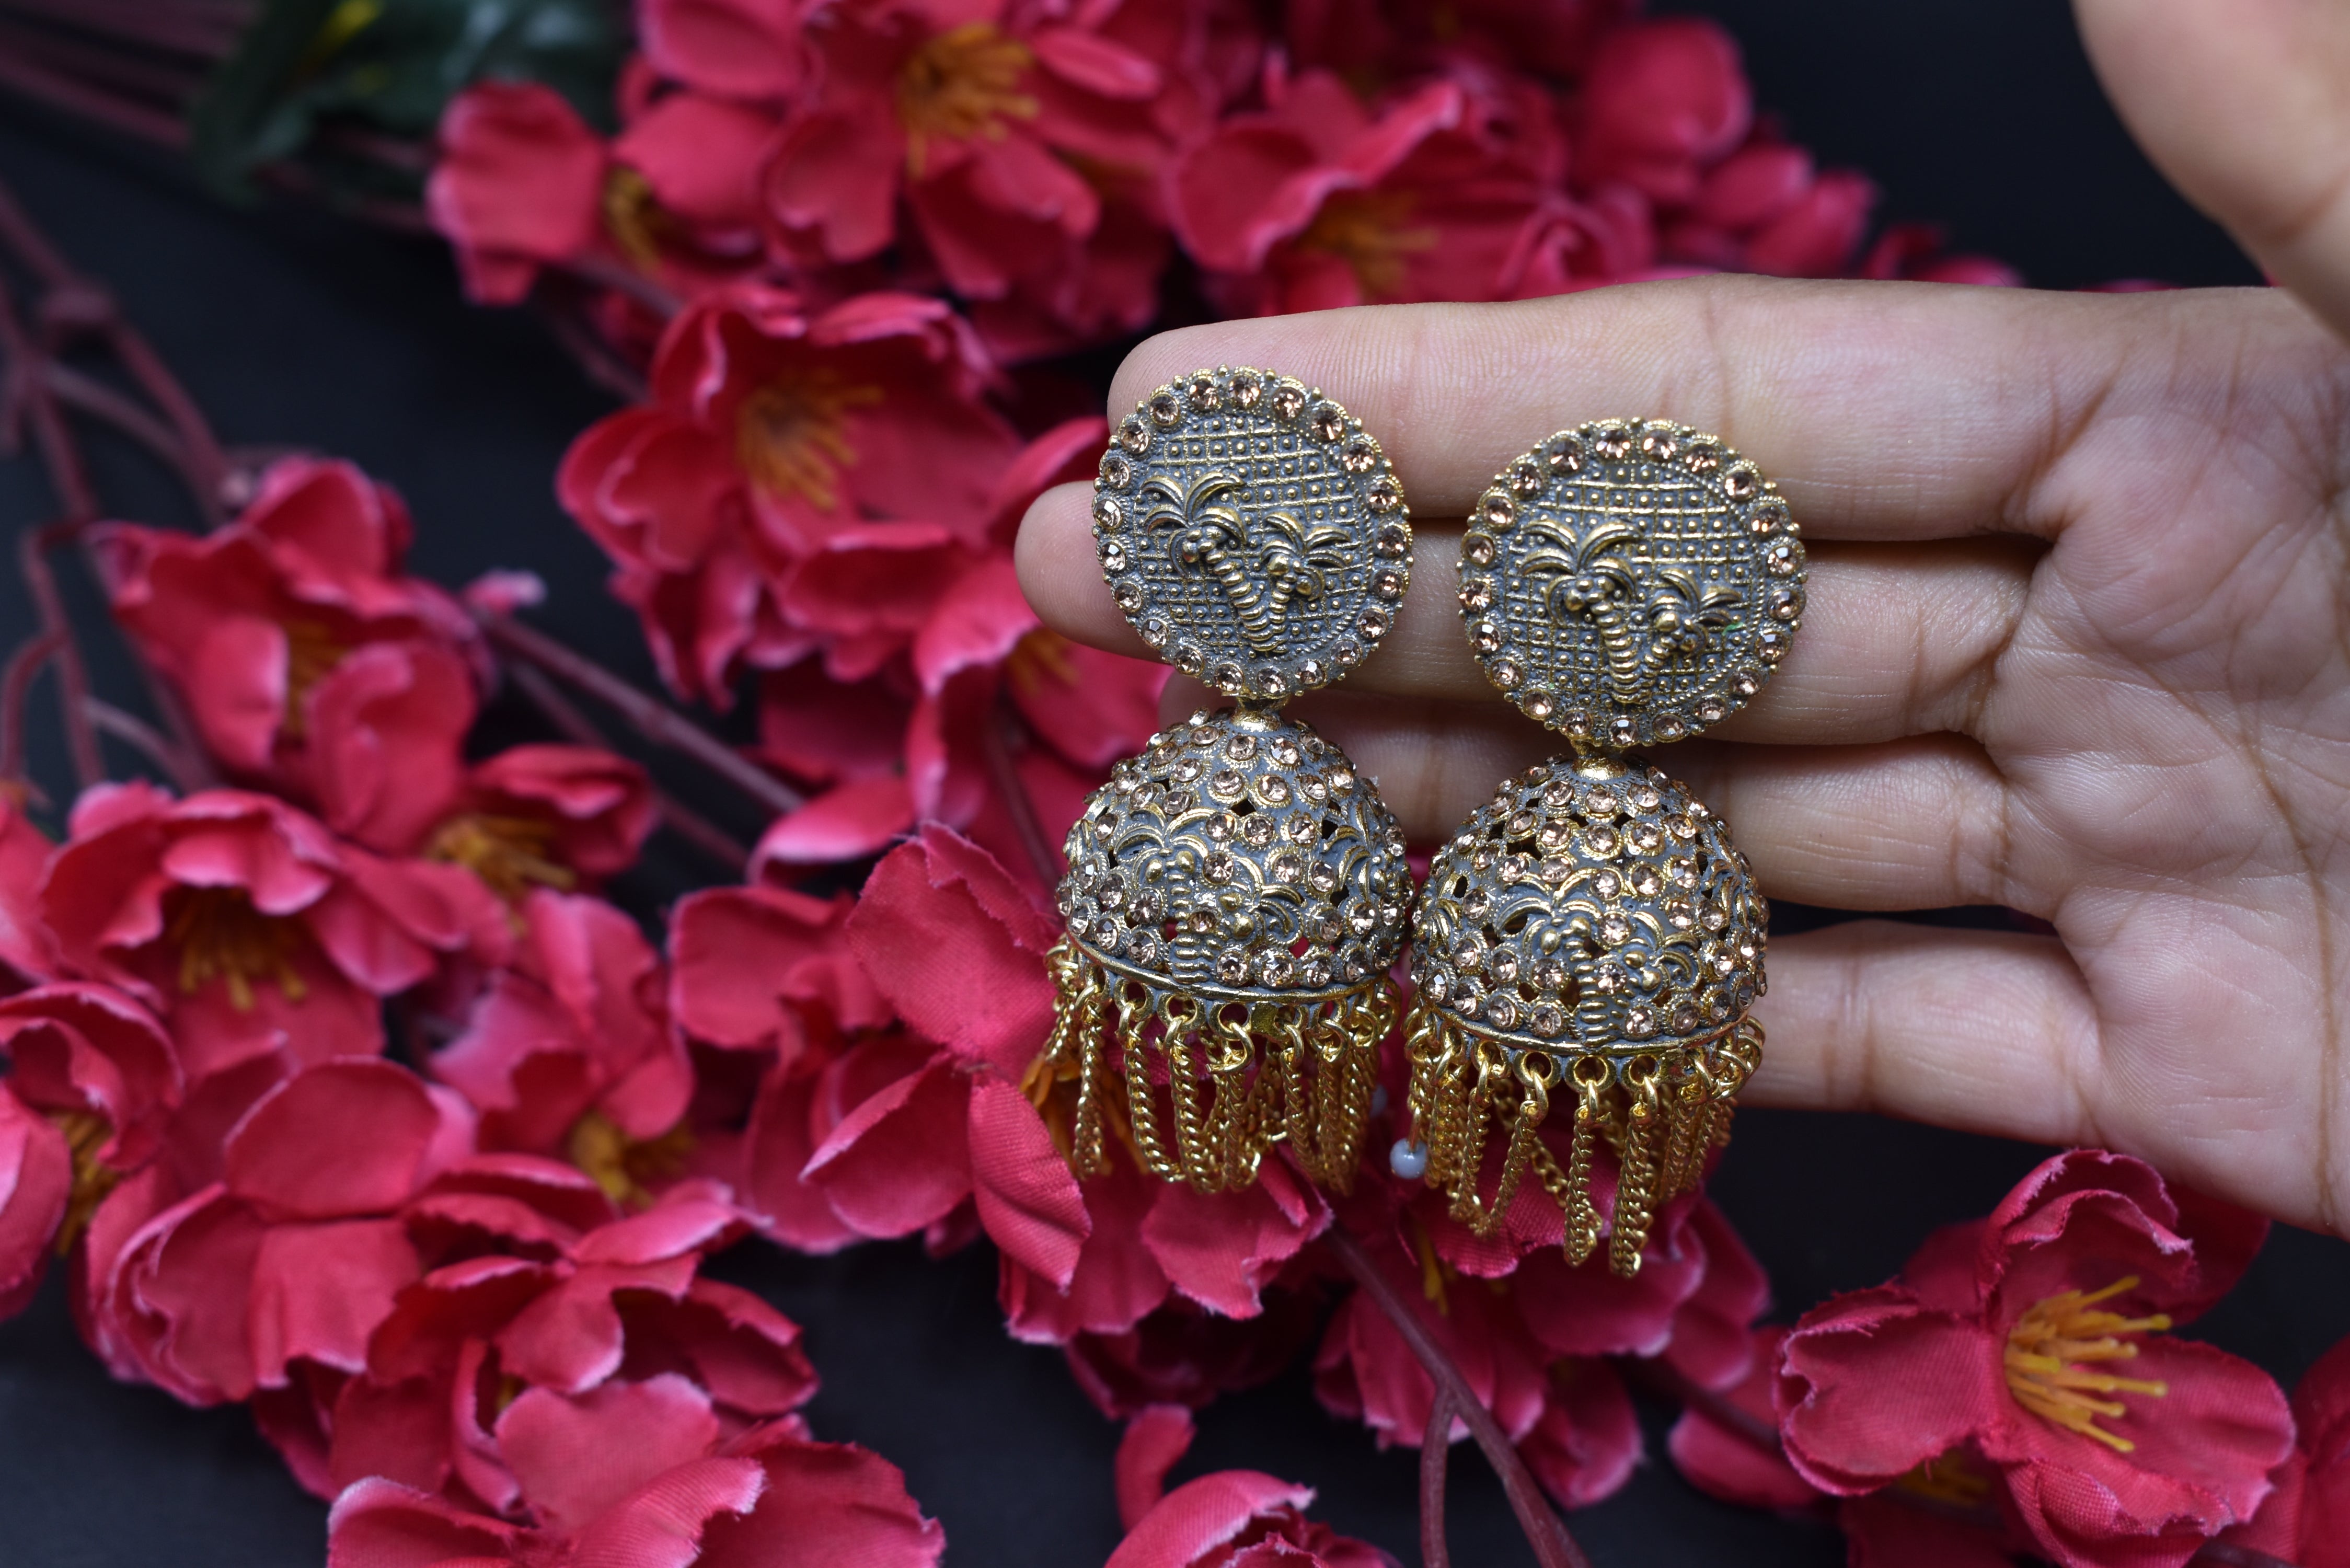 Silver Oxodized Jhumkas Earrings for women and Girls